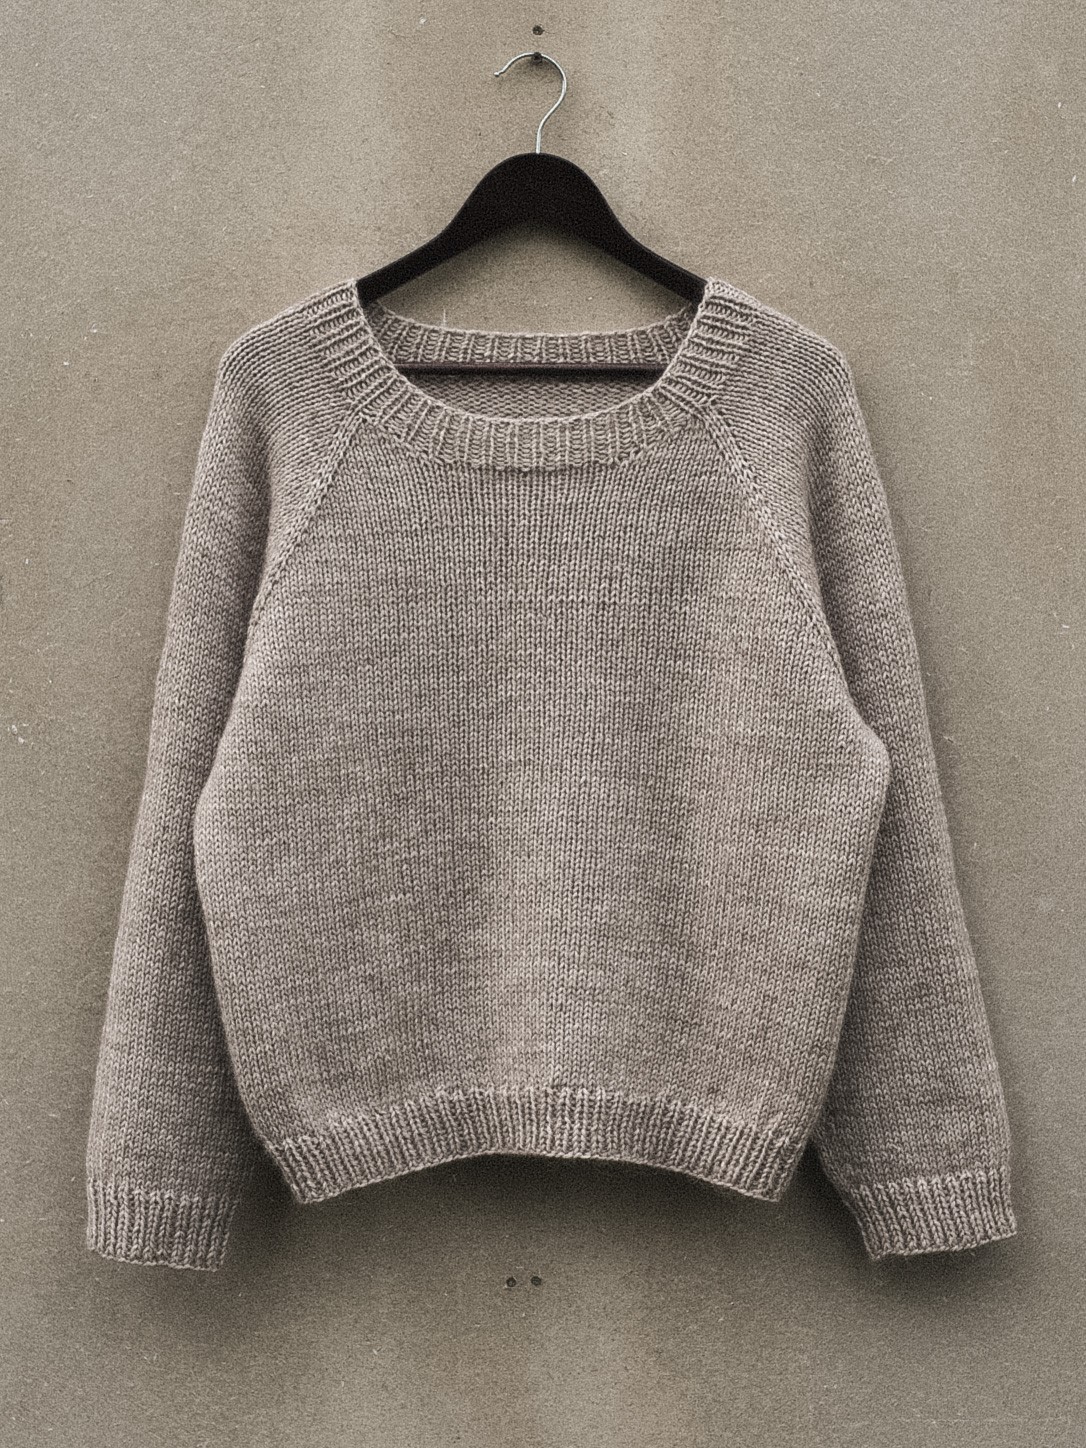 Minimalist Chic: The Timeless Appeal of Capsule Sweater No. 1